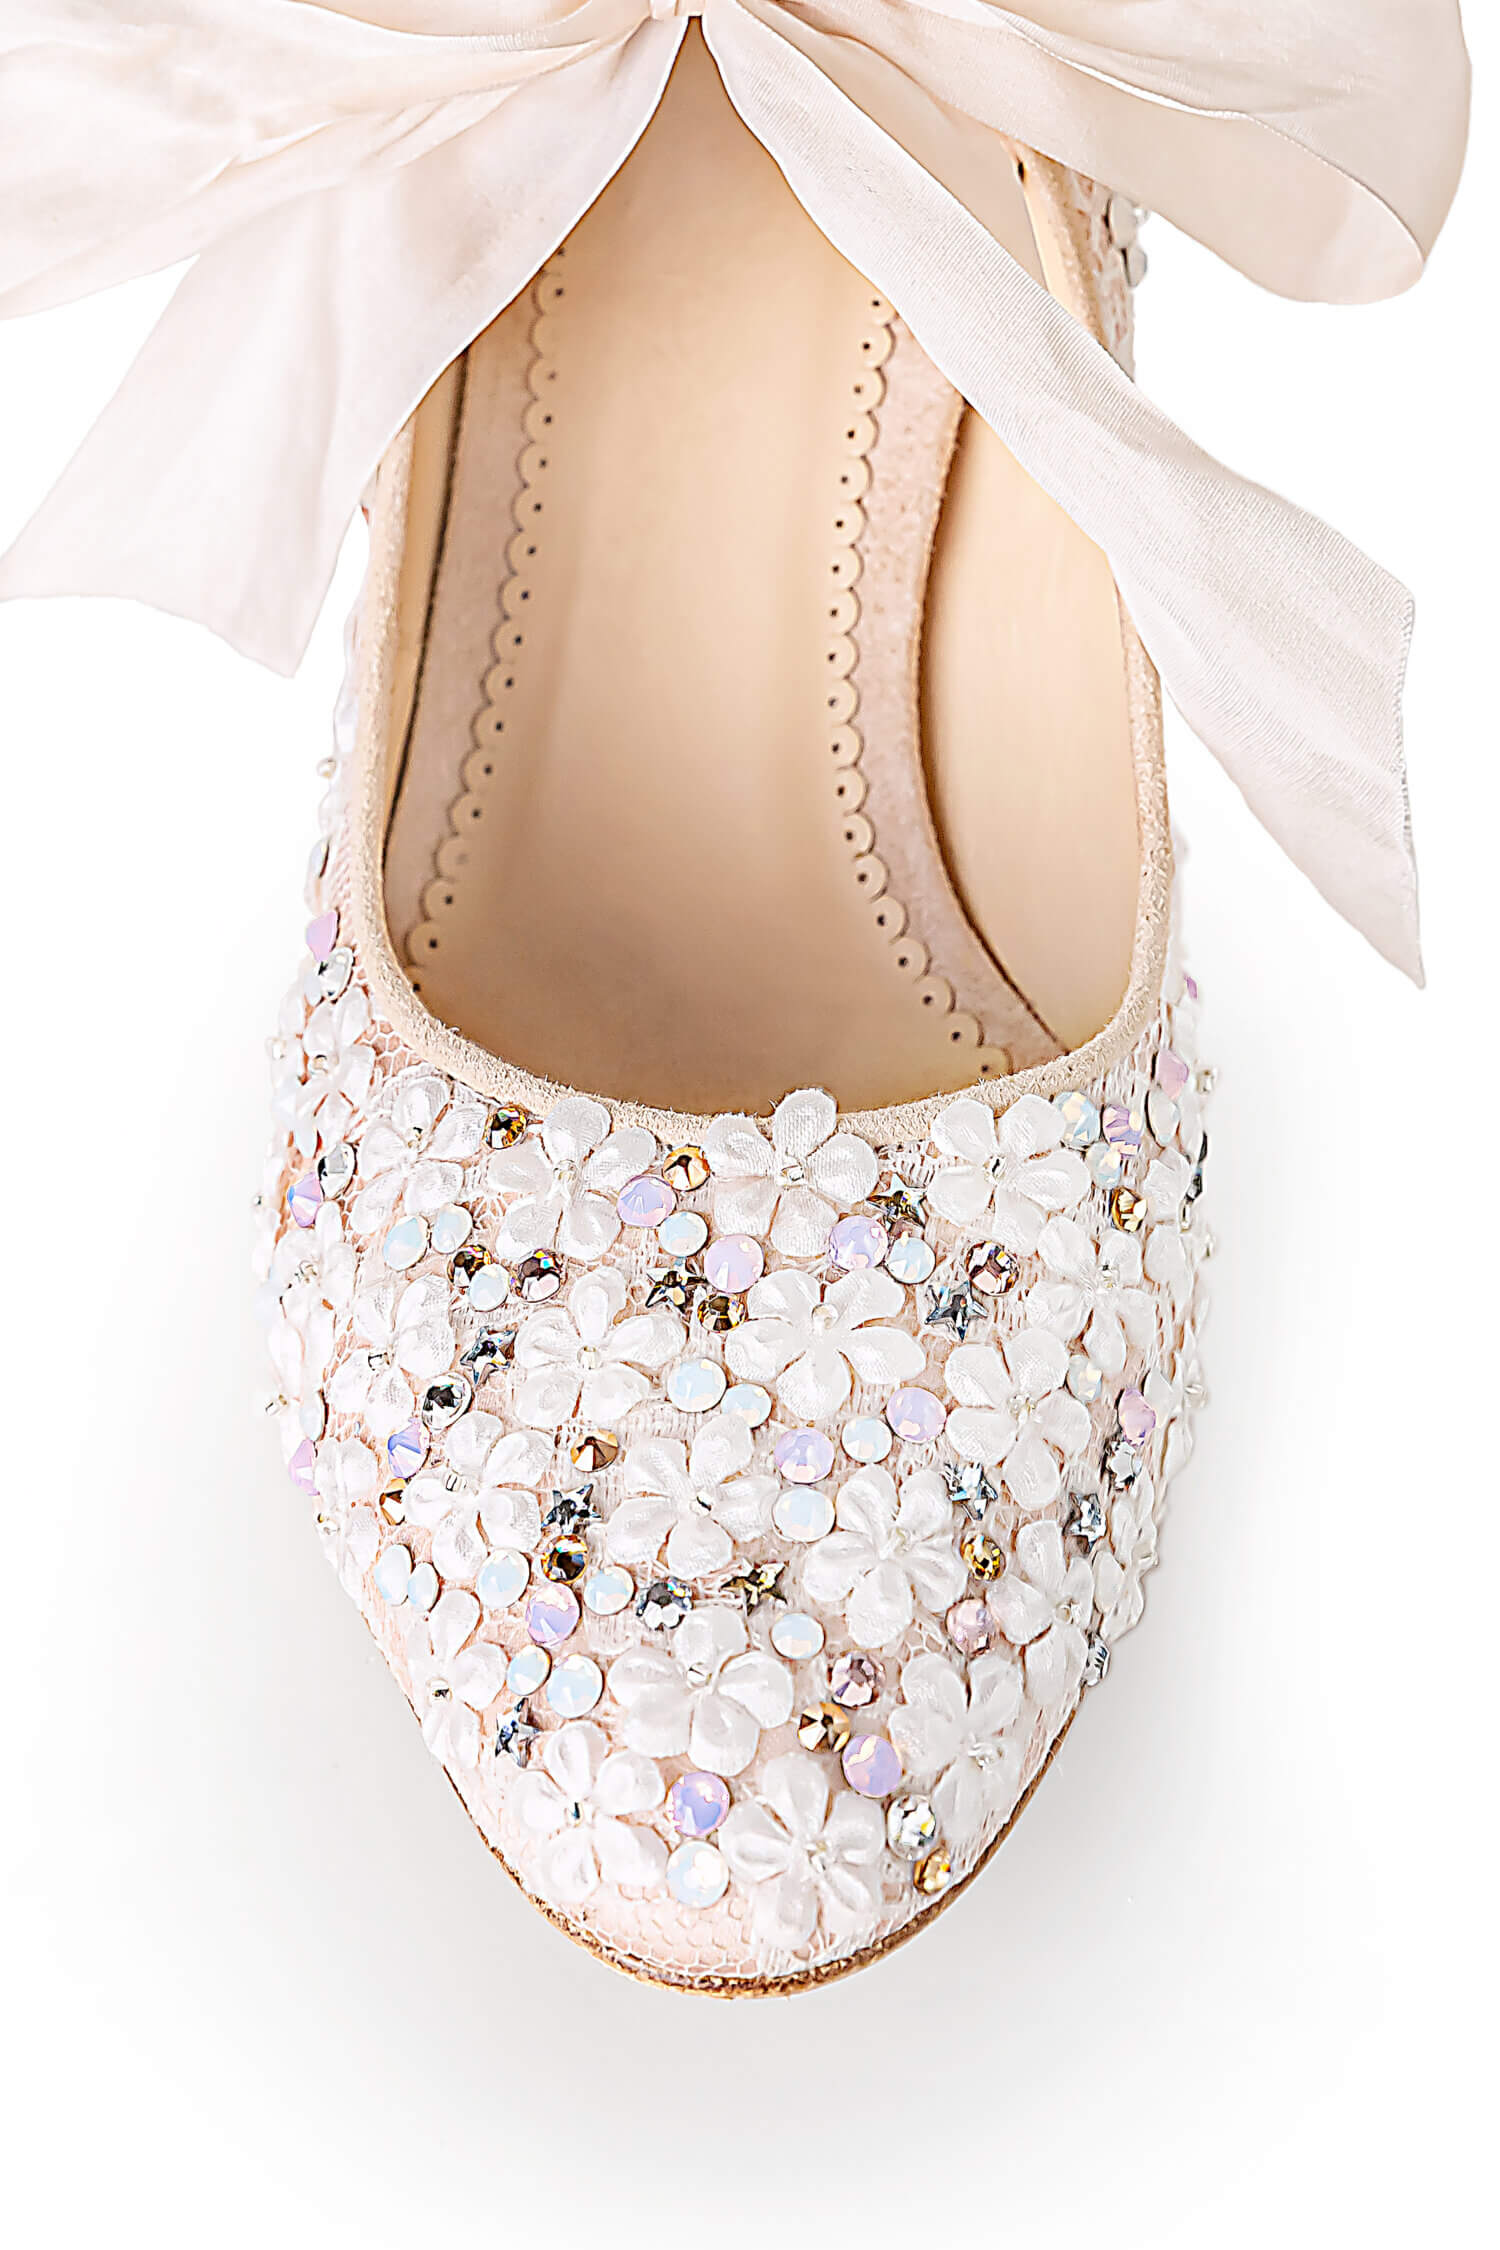 Dottie D Blossom embellished bridal mary janes. Wedding shoes handmade by Di Hassall.